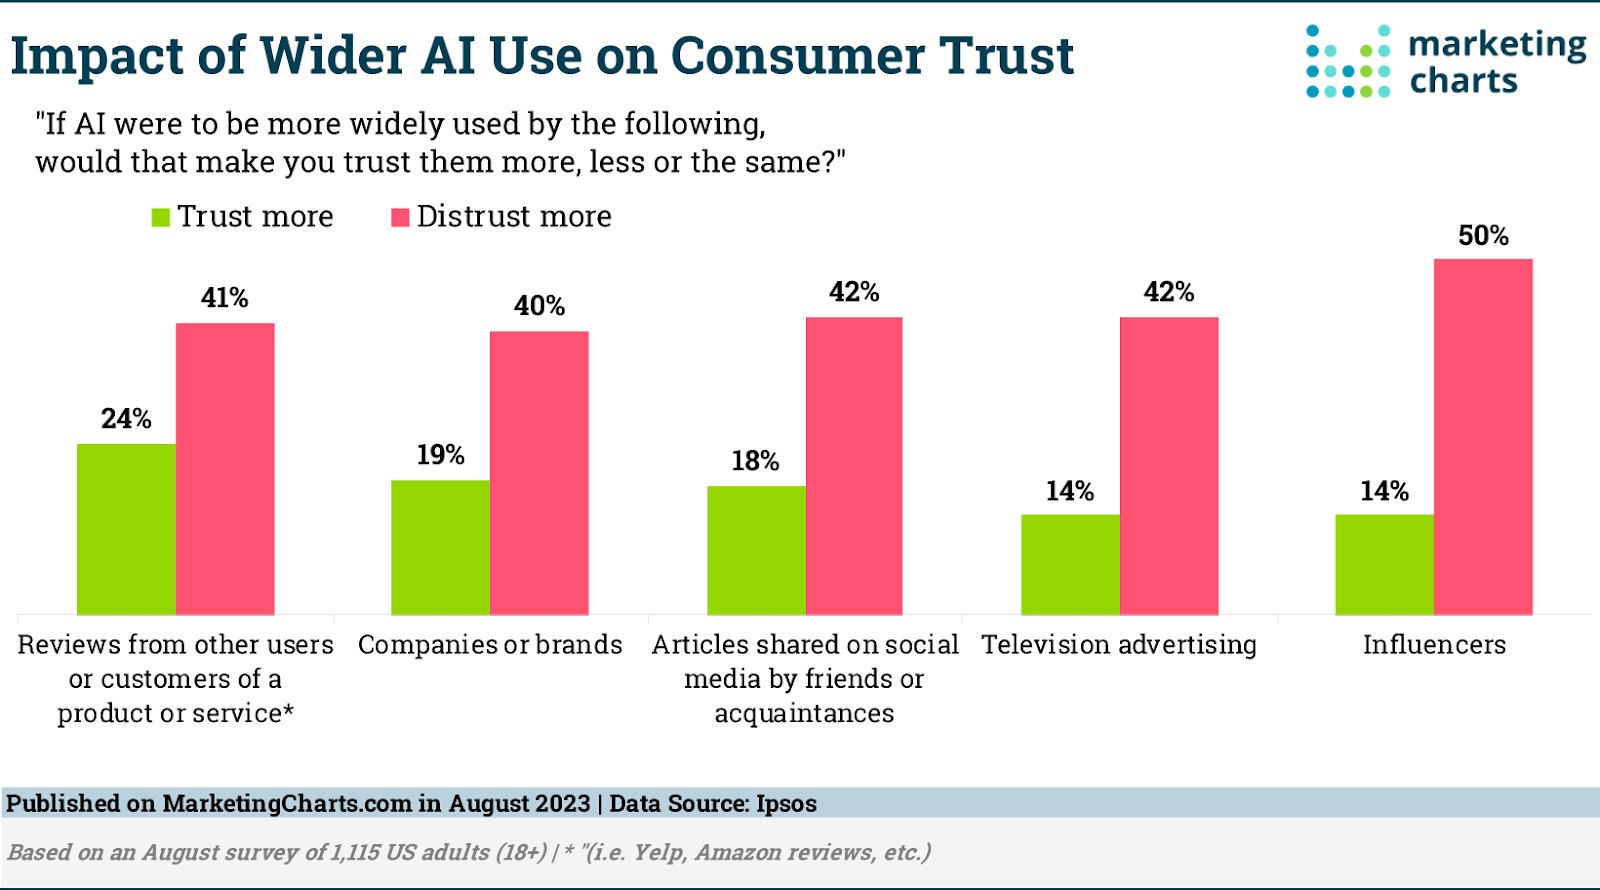 Screenshot of a markertingcharts.com chart showing the impact of wider AI use on consumer trust